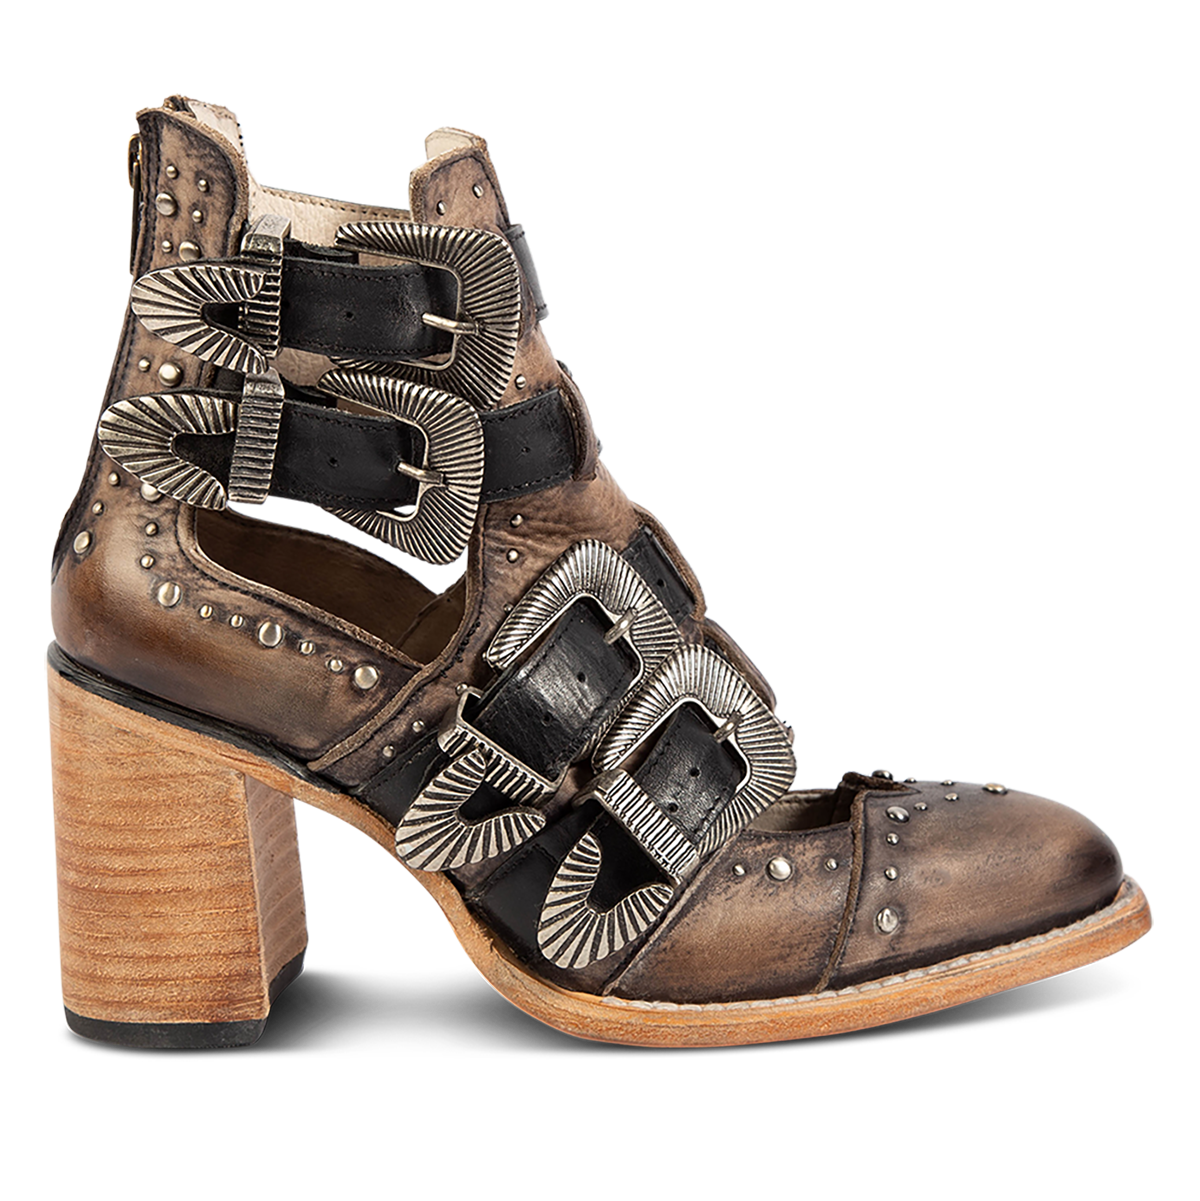 FREEBIRD women's Judge black leather bootie with engraved belts, contrating metal embellishments and a stacked heel